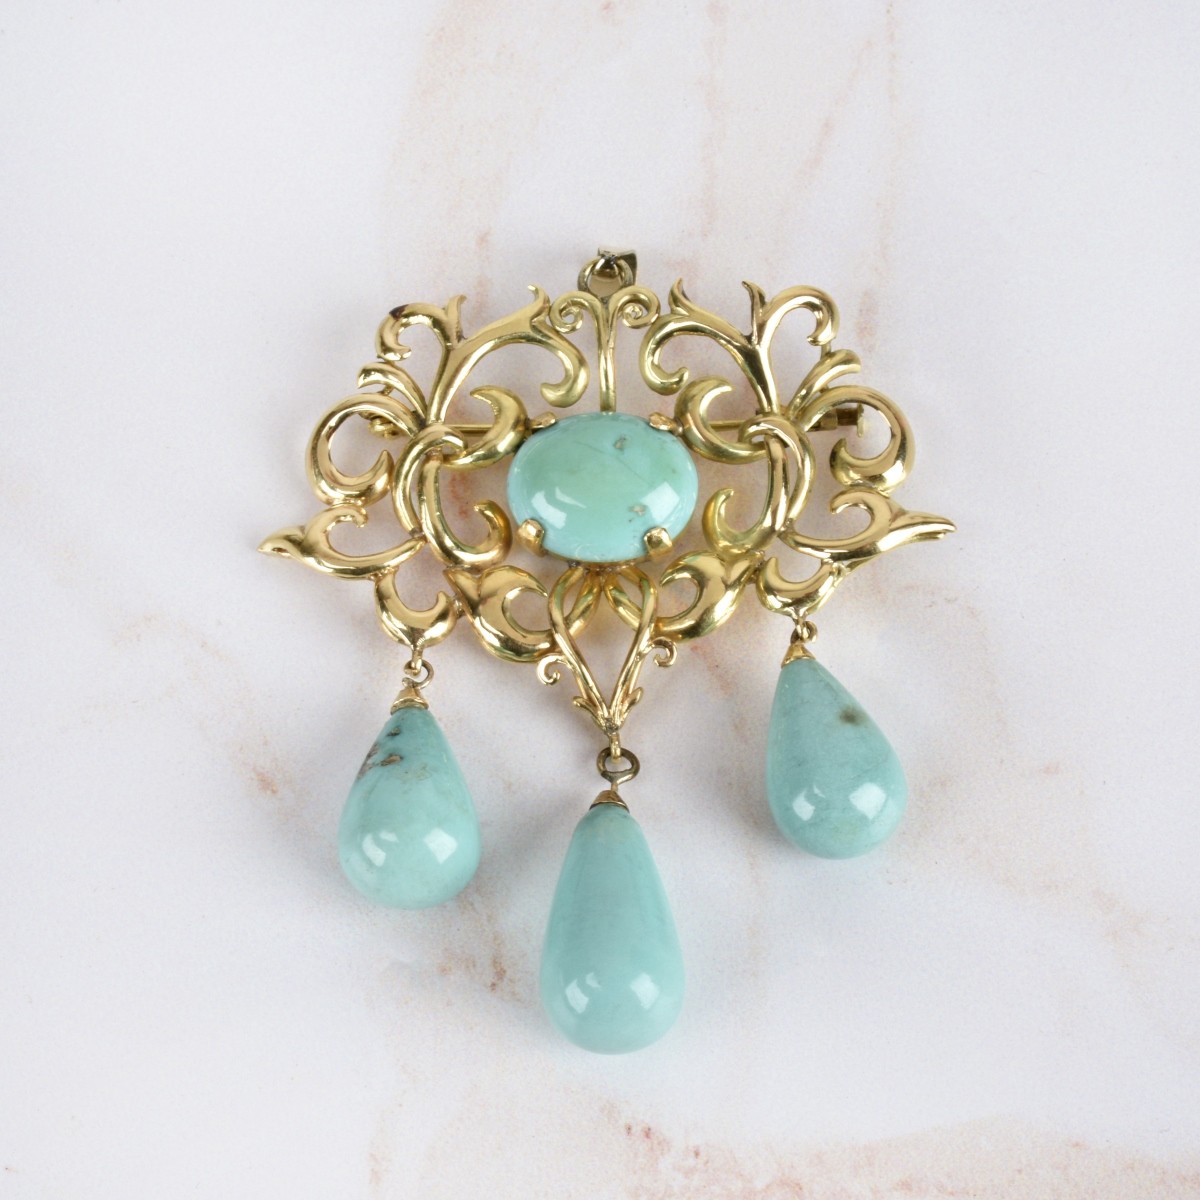 Art Nouveau Turquoise and 14K Brooch